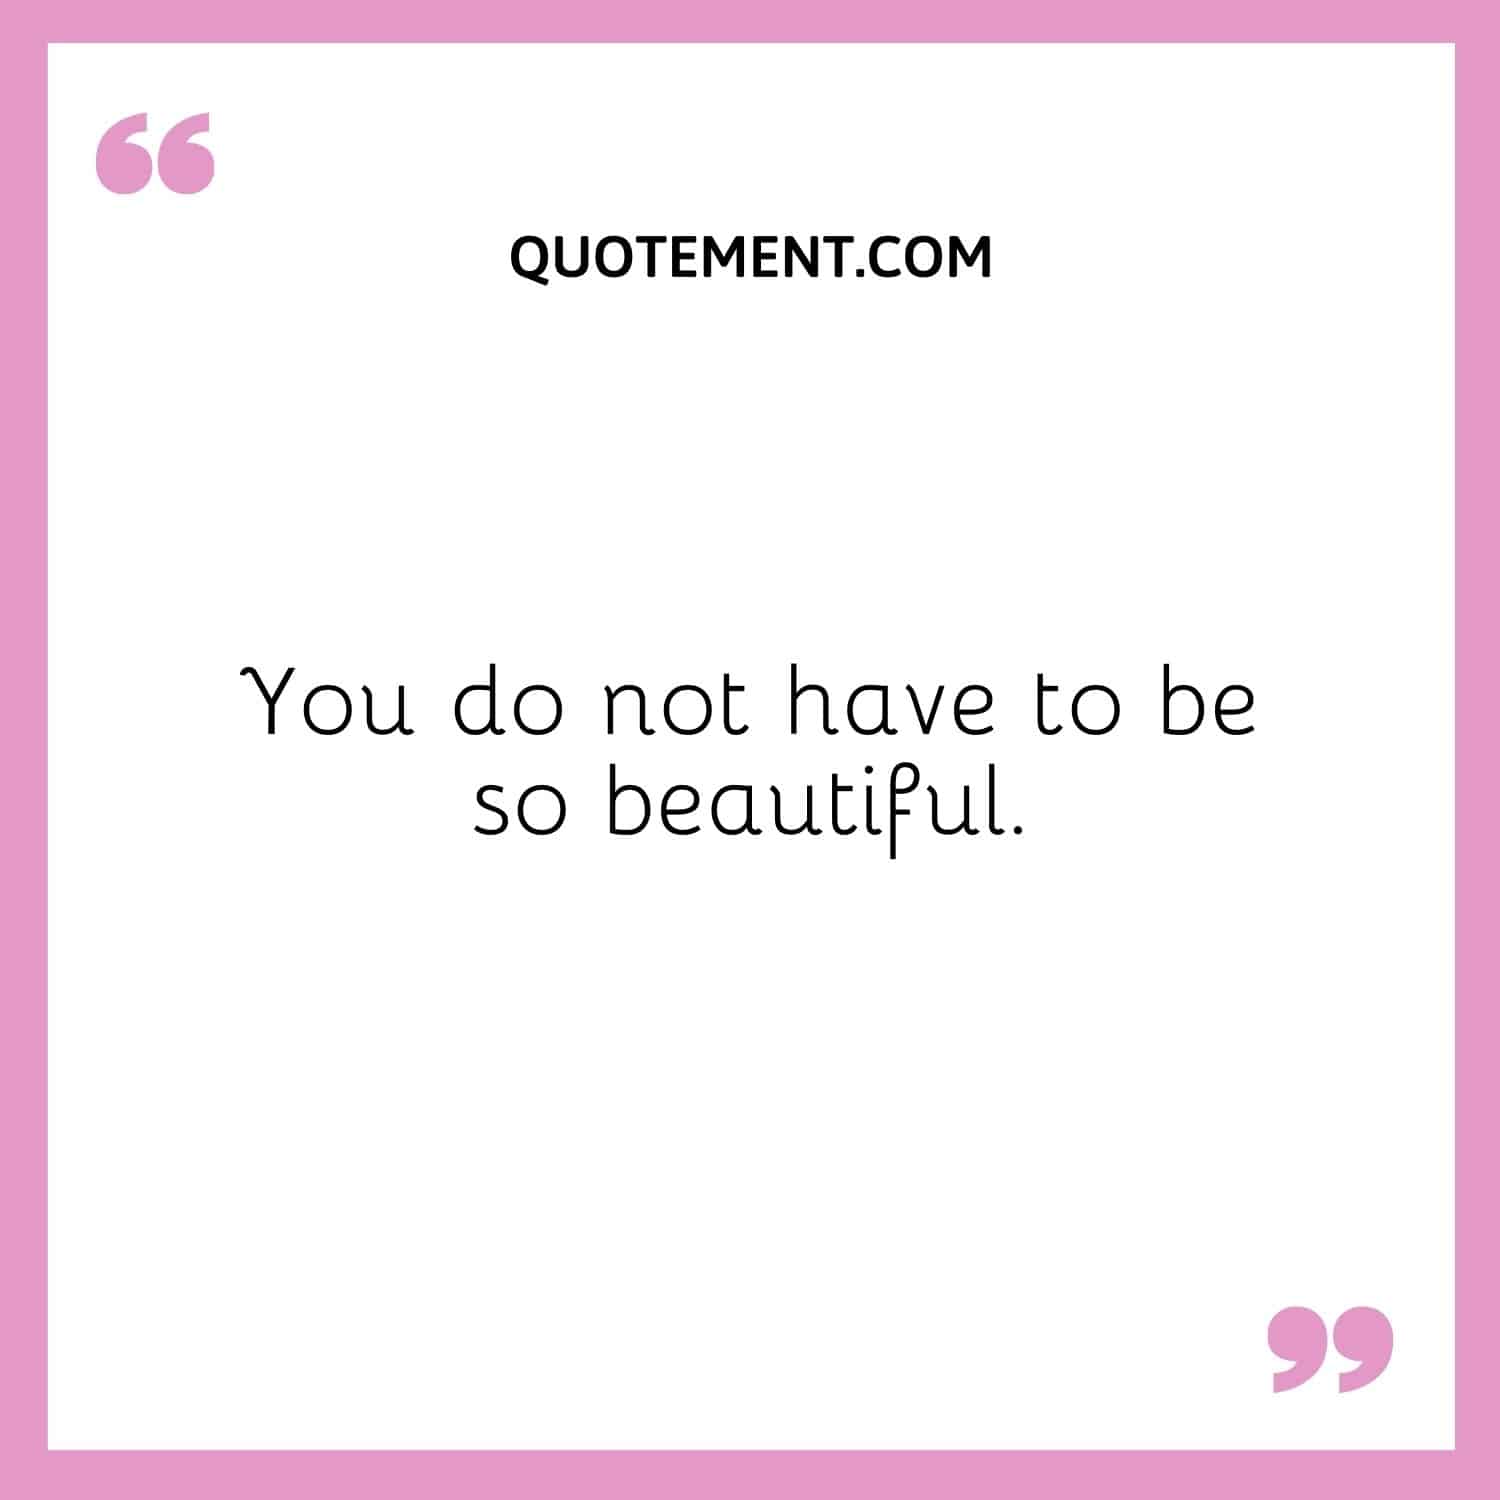 You do not have to be so beautiful.